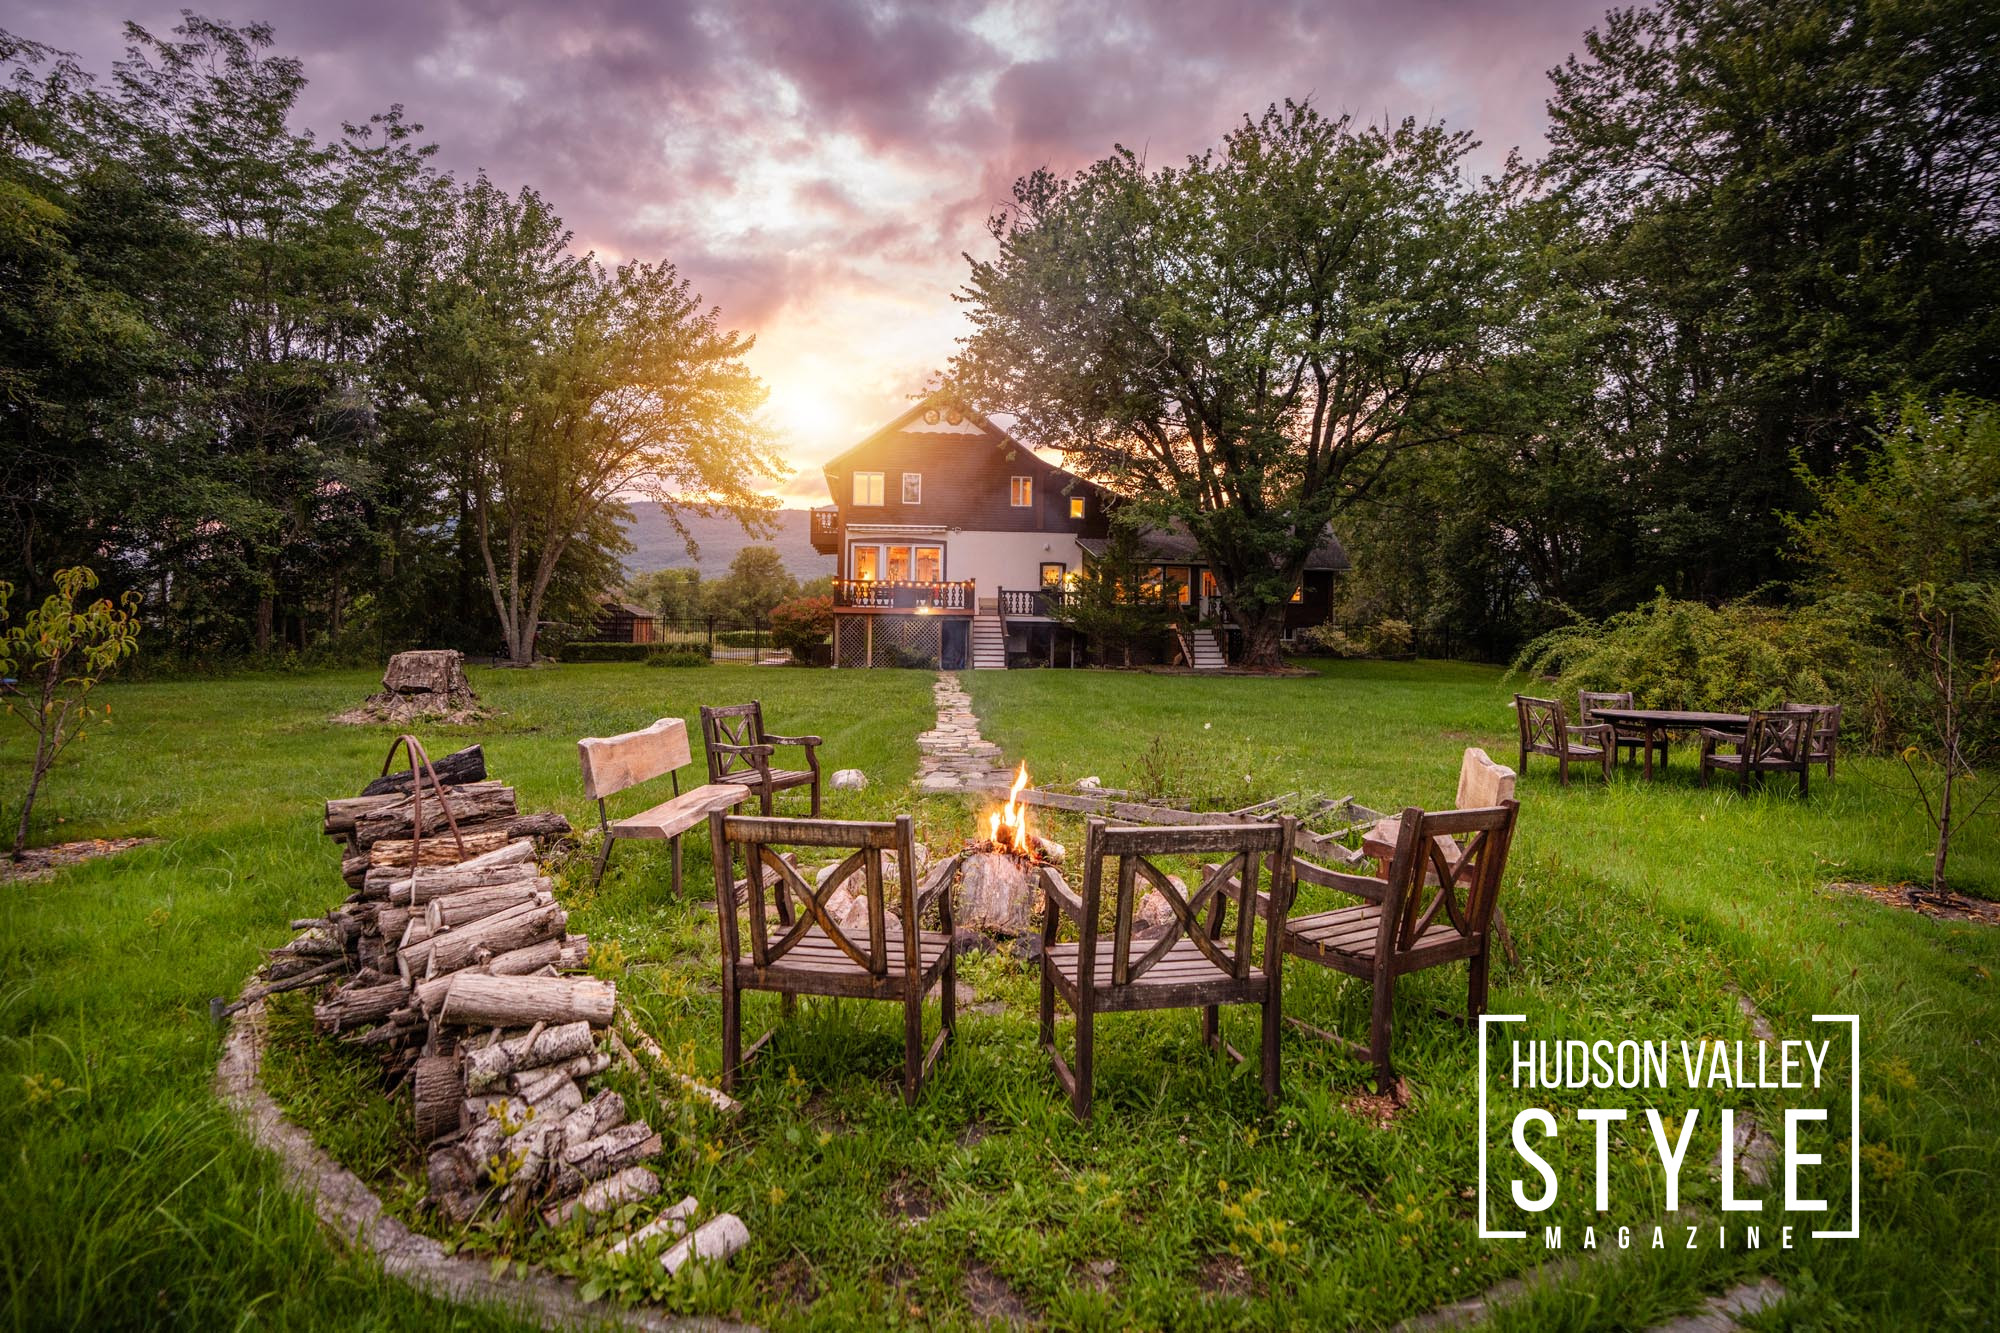 A Mystical Evening in Hudson Valley: Maxwell Alexander's Captivating Photoshoot at the Shawangunk Chalet in Gardiner, NY – Presented by Alluvion Vacations – Photography by Maxwell Alexander for Alluvion Media